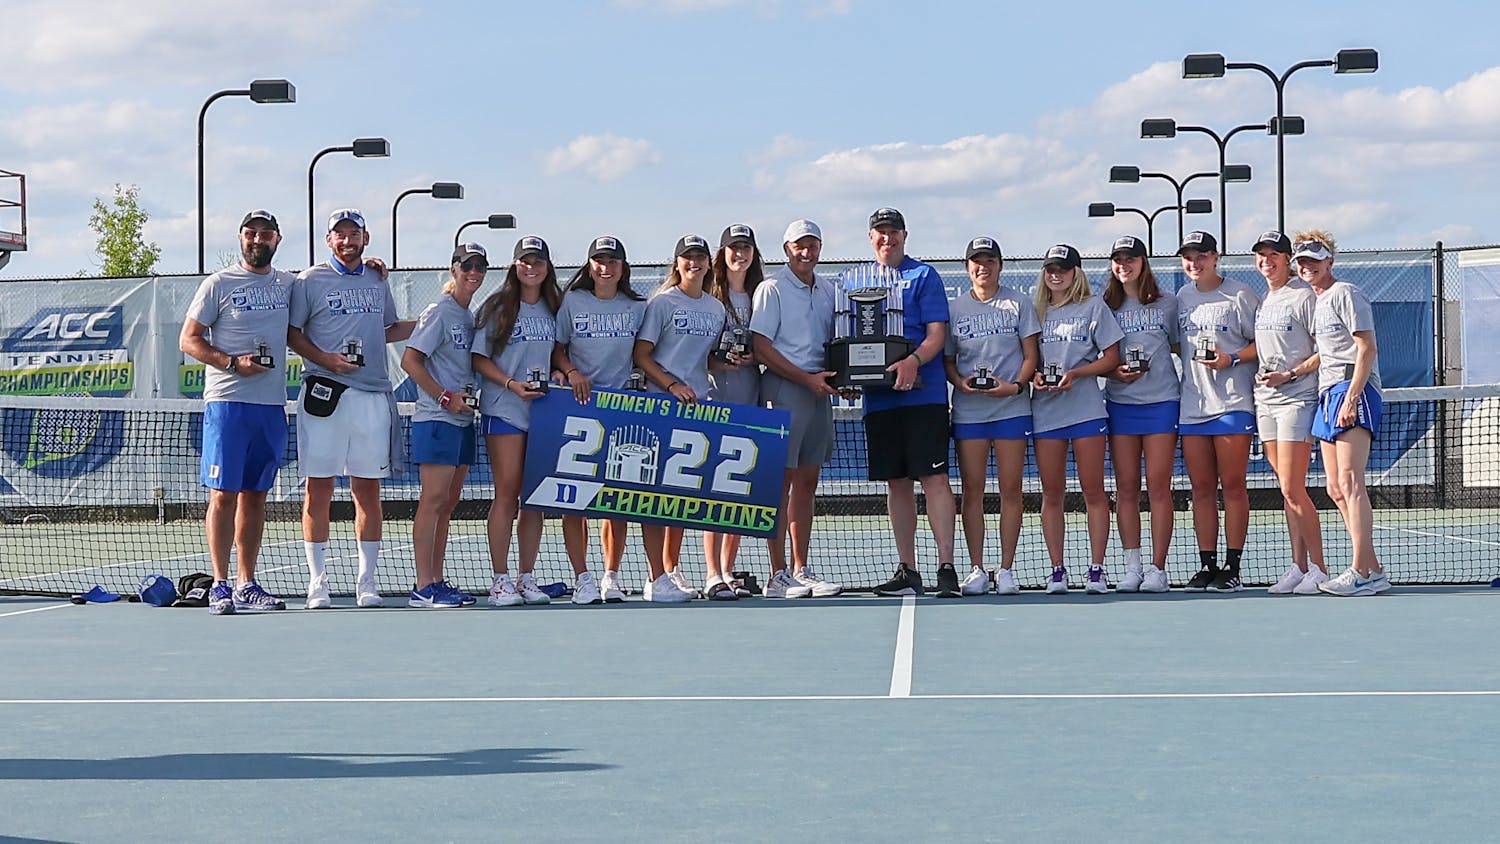 Duke's season featured its first ACC championship since 2012.